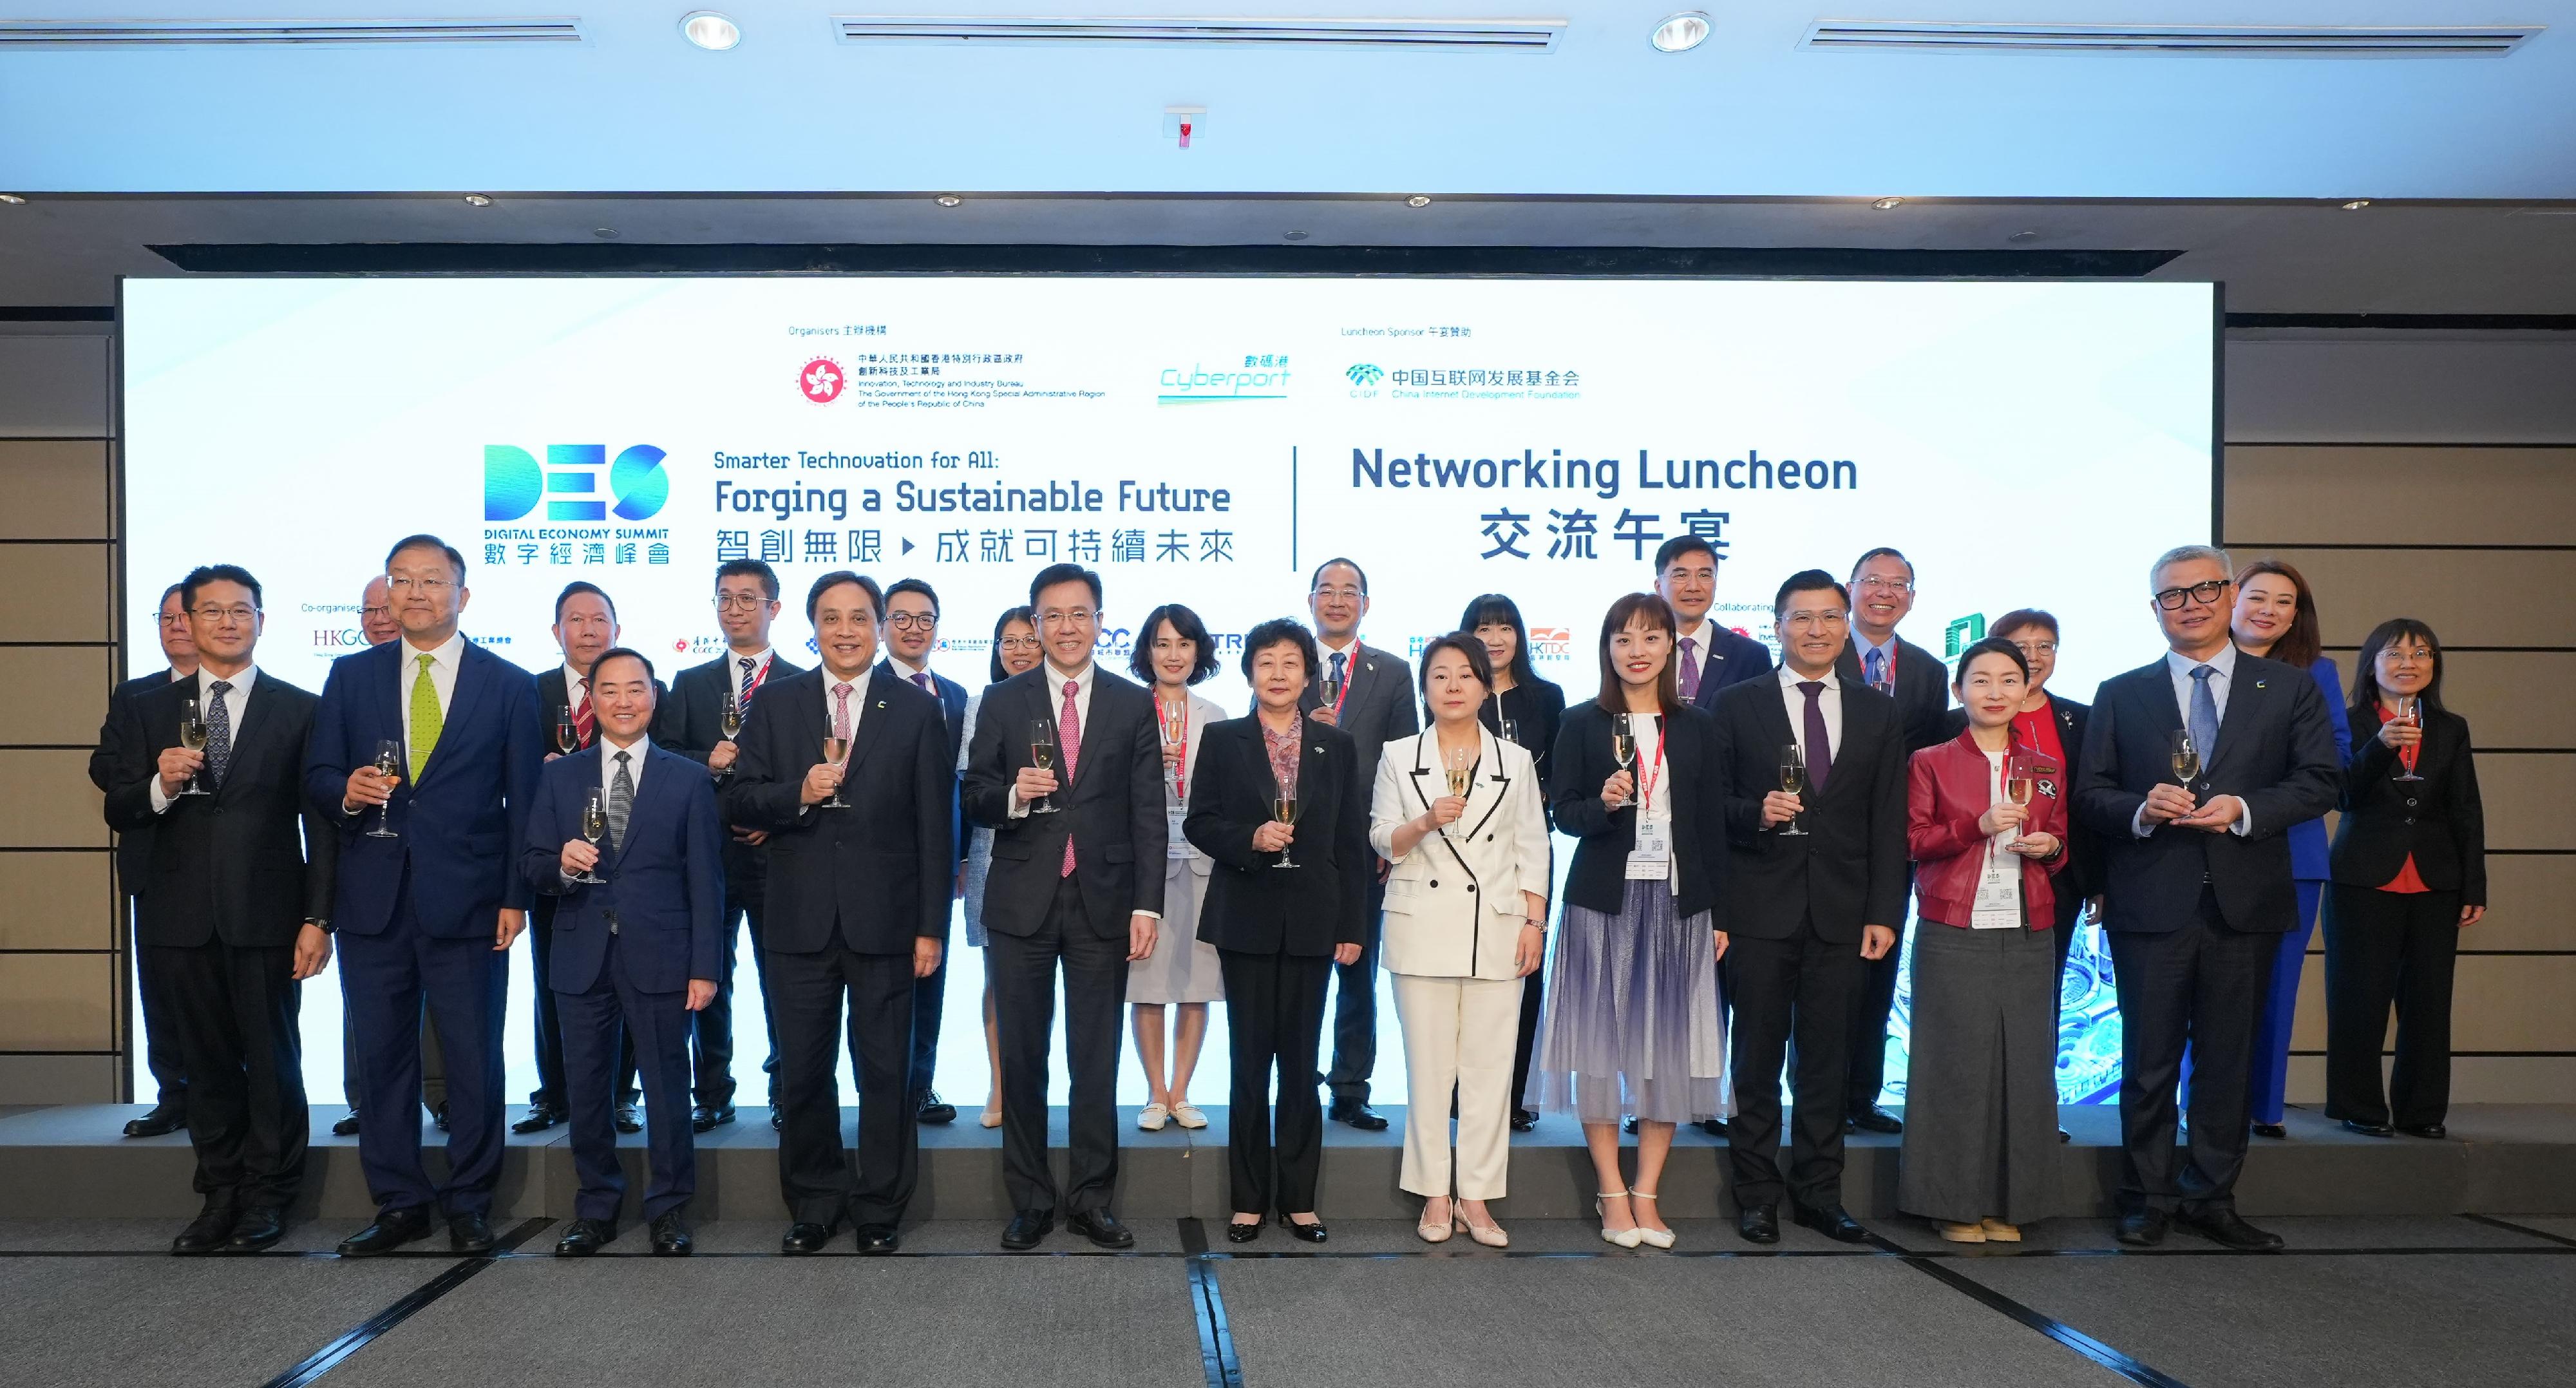 The Secretary for Innovation, Technology and Industry, Professor Sun Dong, attended the Digital Economy Summit 2024 Networking Luncheon today (April 12). Photo shows Professor Sun (front row, fifth left); the President of the China Internet Development Foundation, Ms Wang Xiujun (front row, centre); the Secretary-General of the China Internet Development Foundation, Ms Liu Hongyan (front row, fifth right); the Under Secretary for Innovation, Technology and Industry, Ms Lillian Cheong (front row, fourth right); the Government Chief Information Officer, Mr Tony Wong (front row, third left); and other guests proposing a toast at the luncheon.